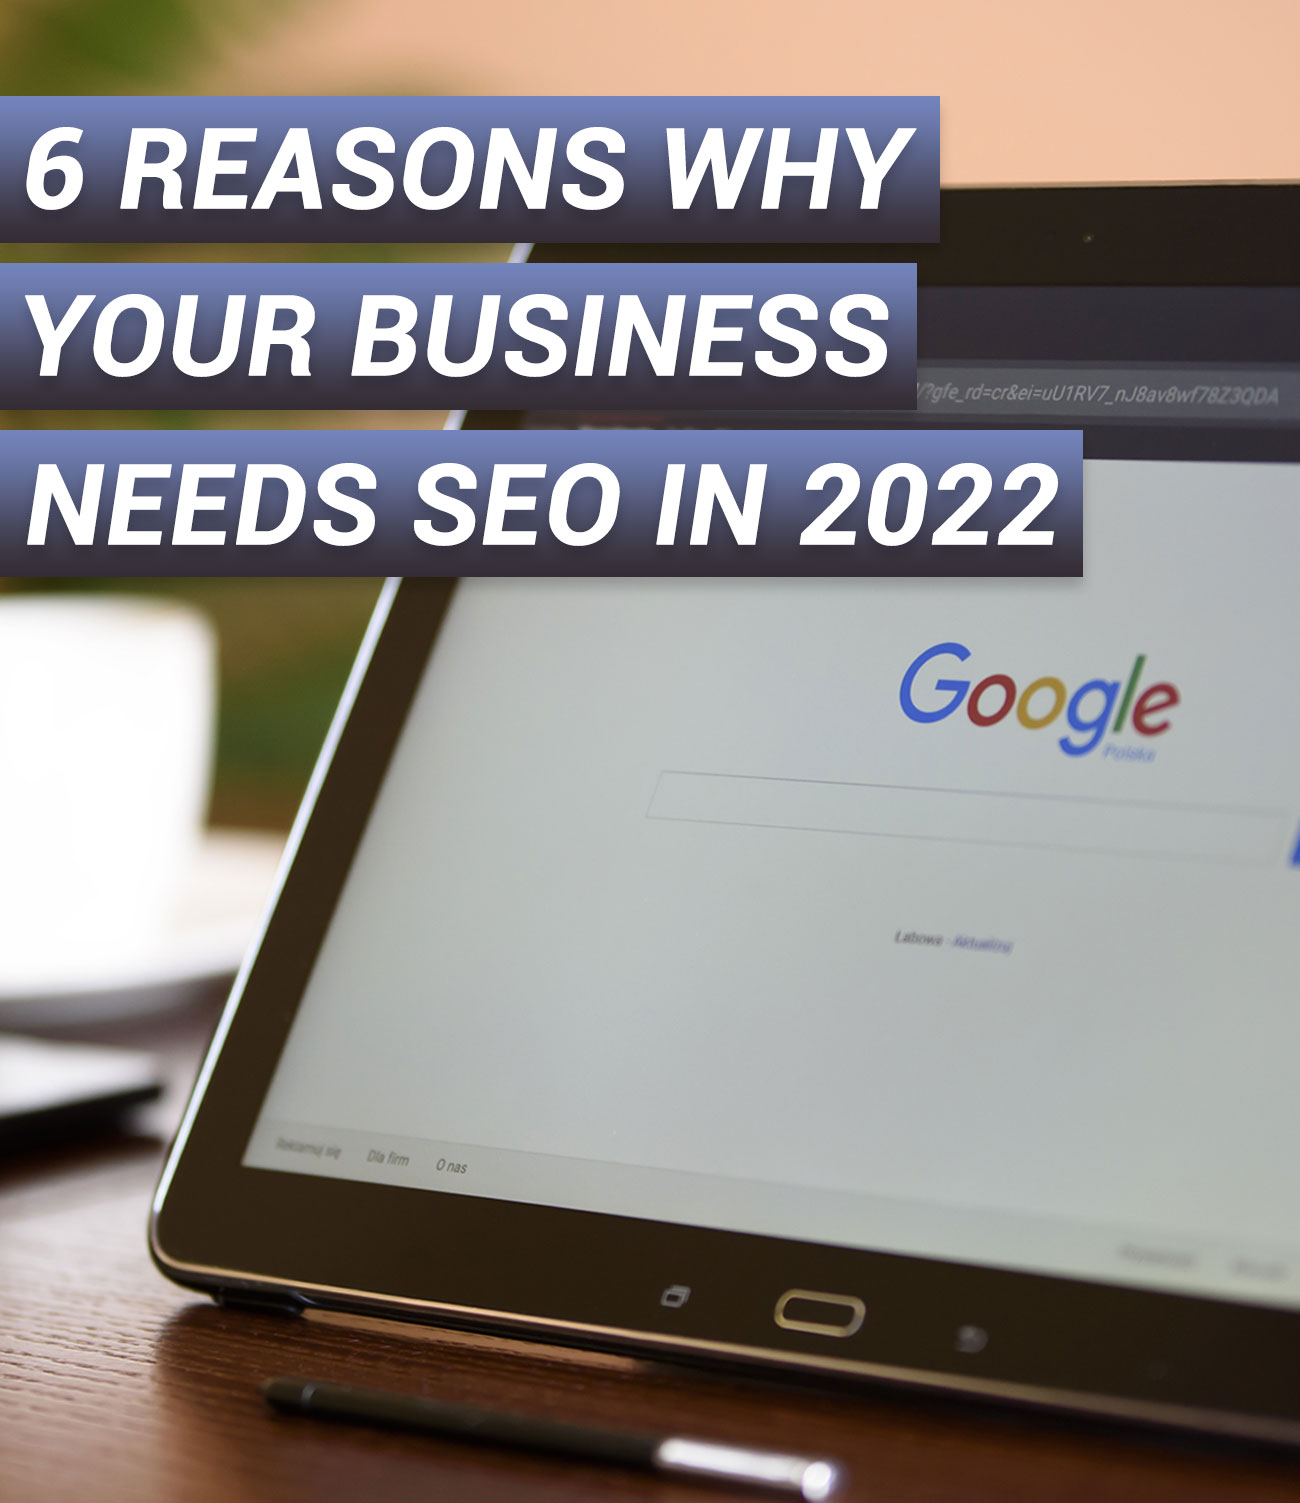 6 Reasons Why Your Business Needs SEO in 2022